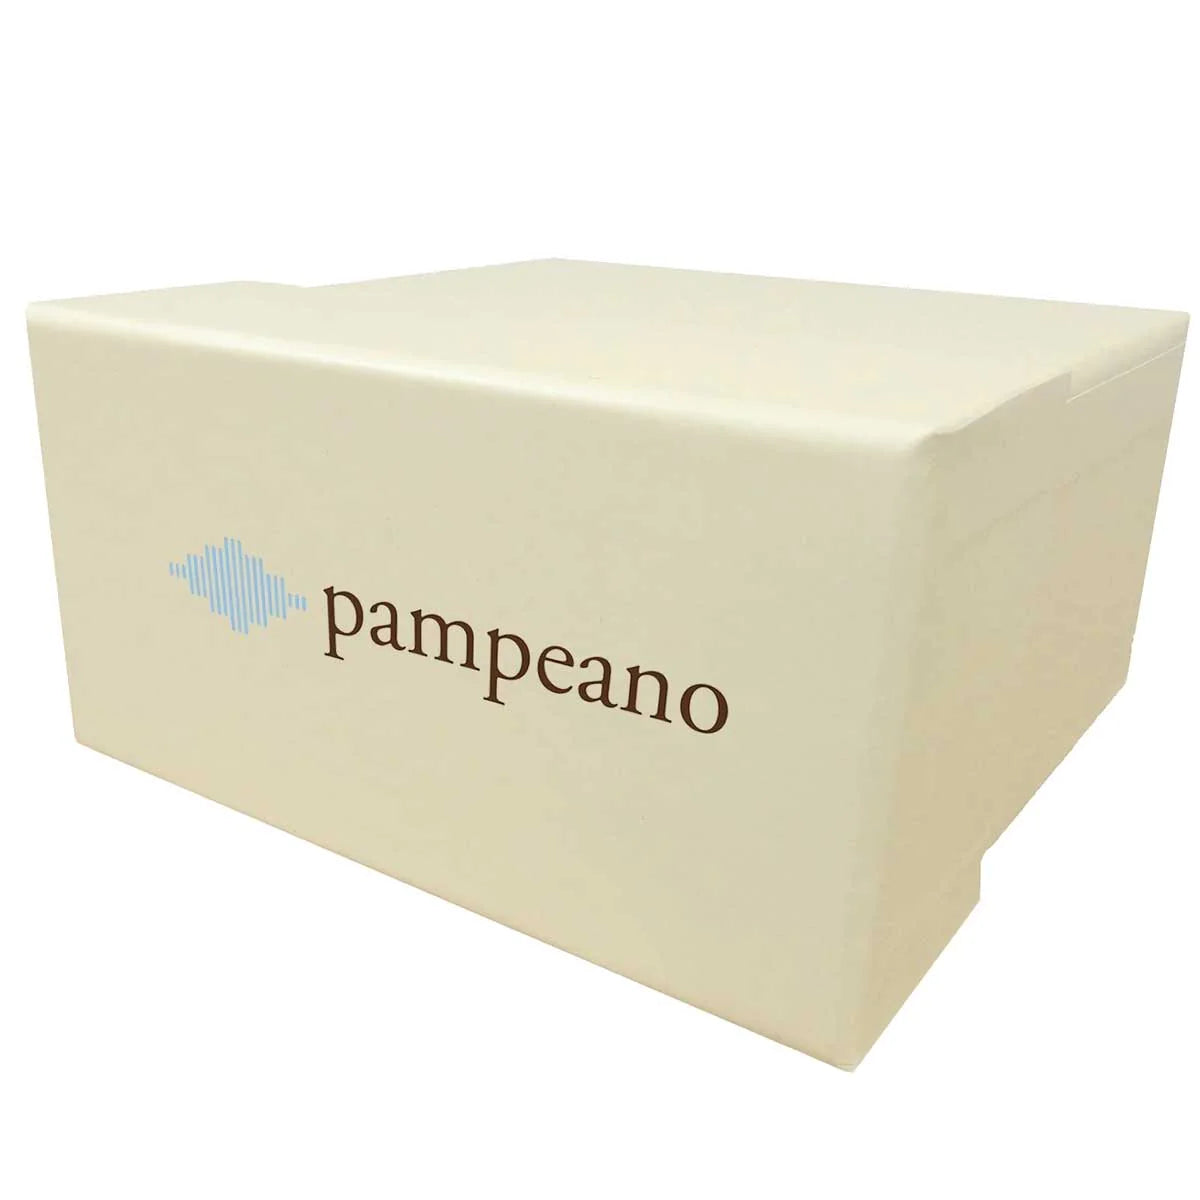 All Pampeano belts are supplied in a high-quality gift box.